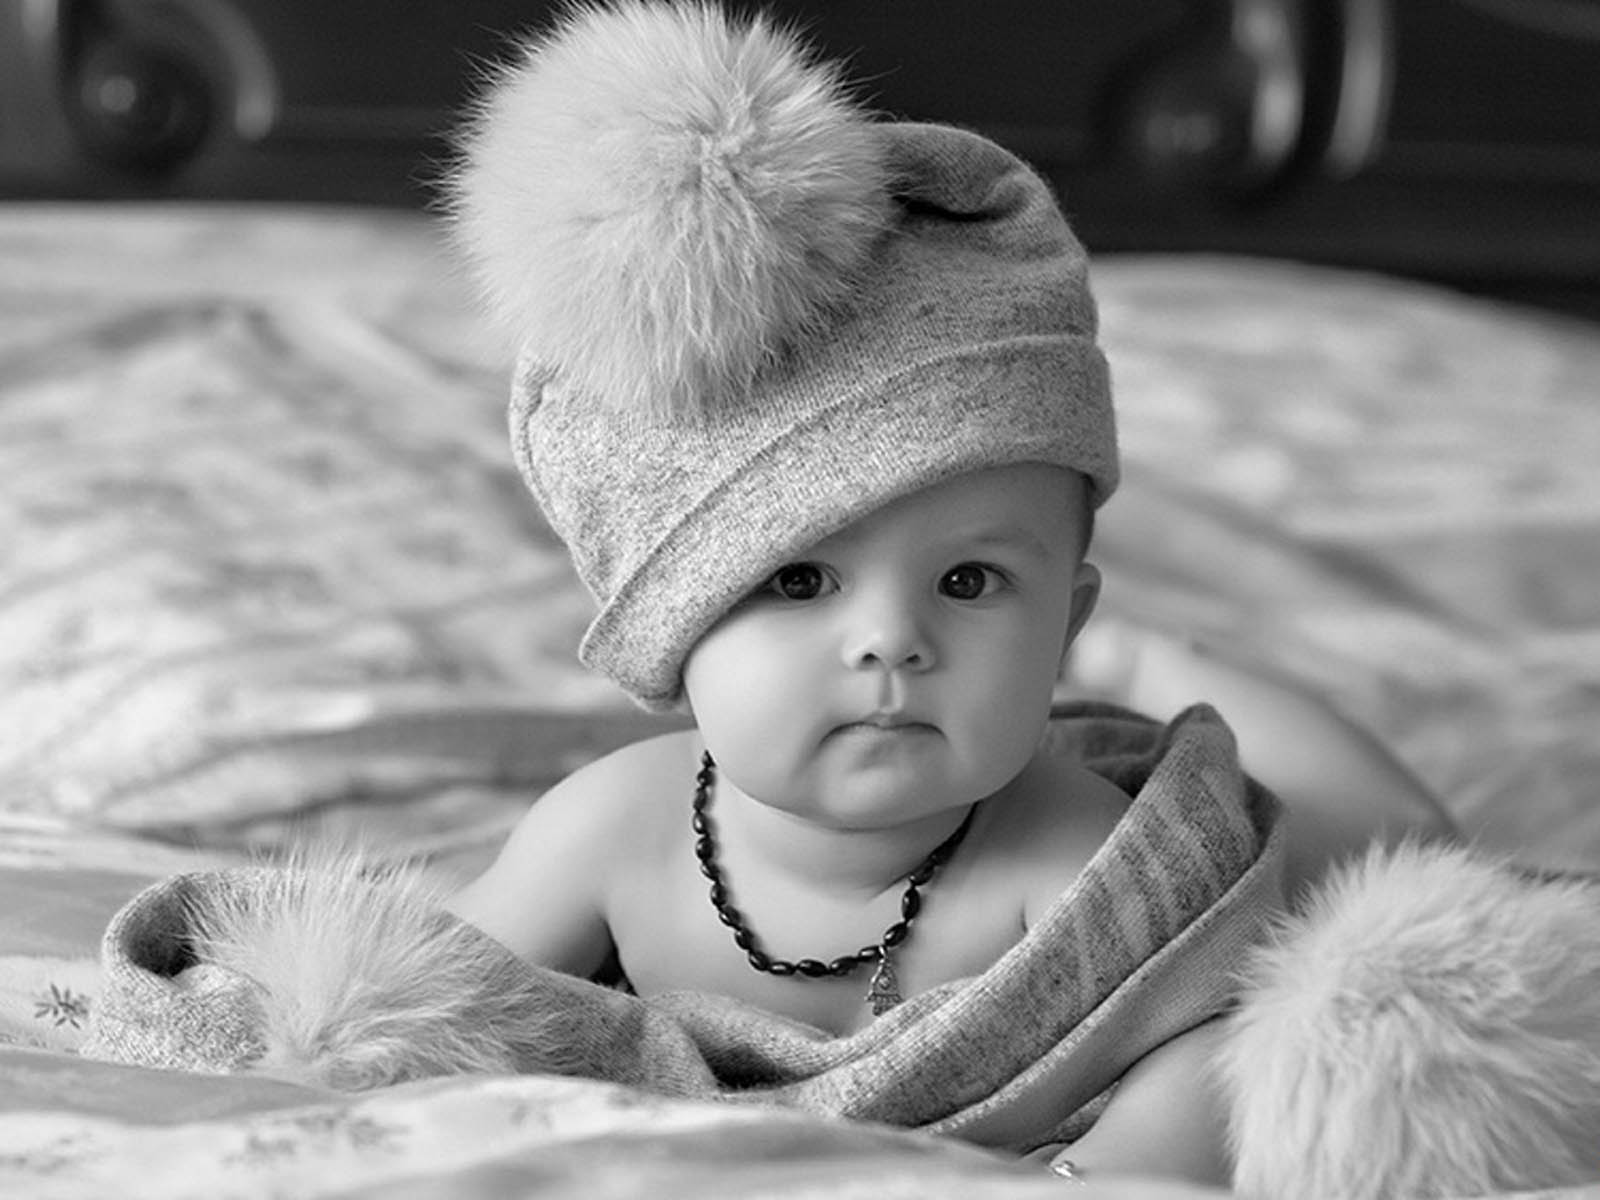  wallpapers  Babies Black  And White  Wallpapers 